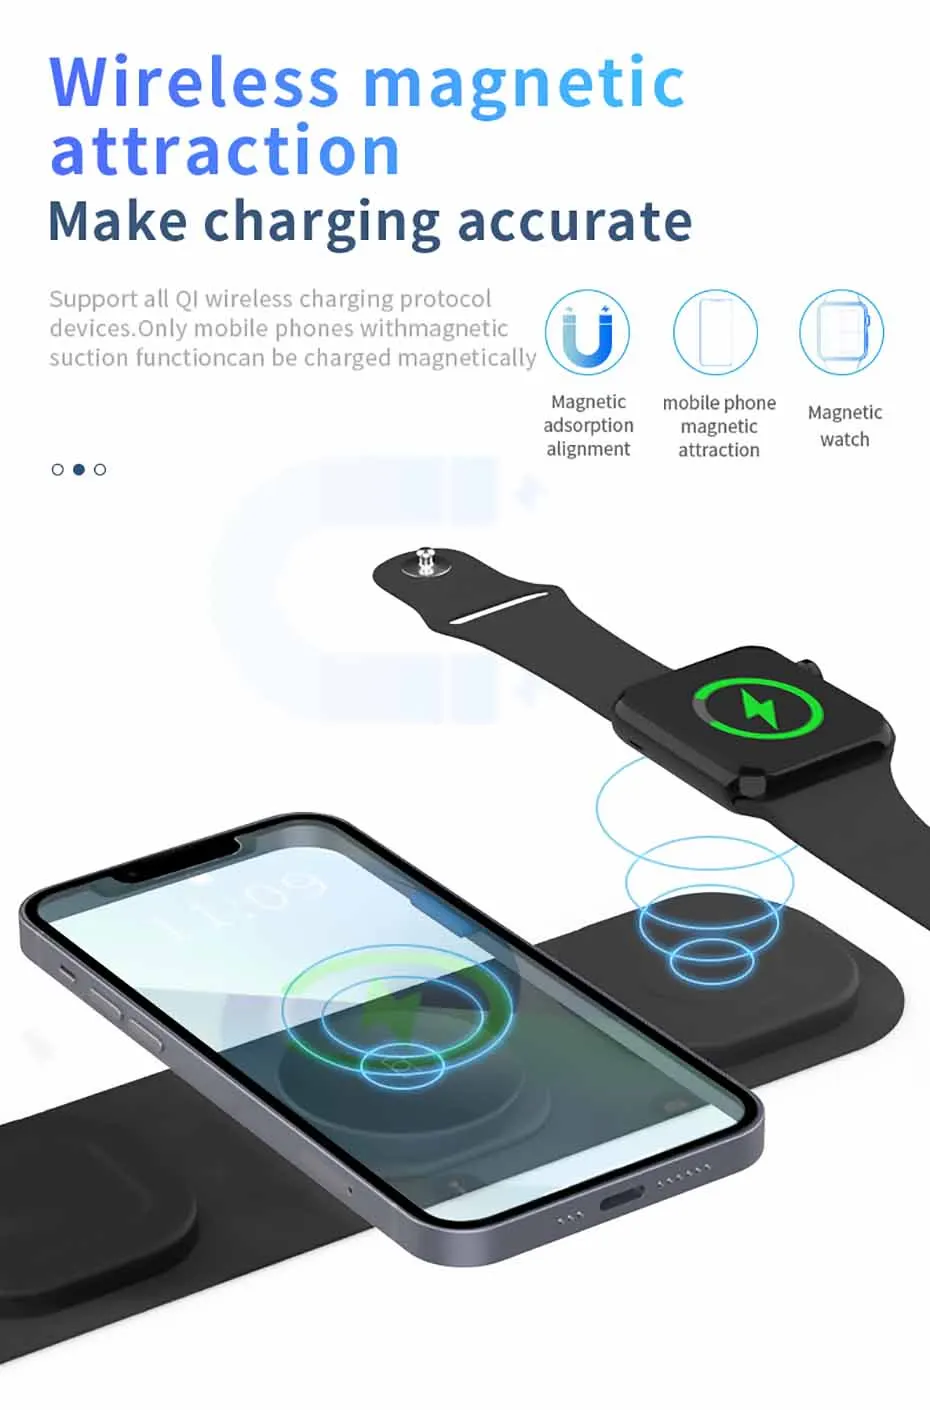 3 In 1 Fabric Travel Wireless Charger, portable multifunction travel wireless charger, Fast Wireless Charging Pad, Foldable Wireless Charging Station